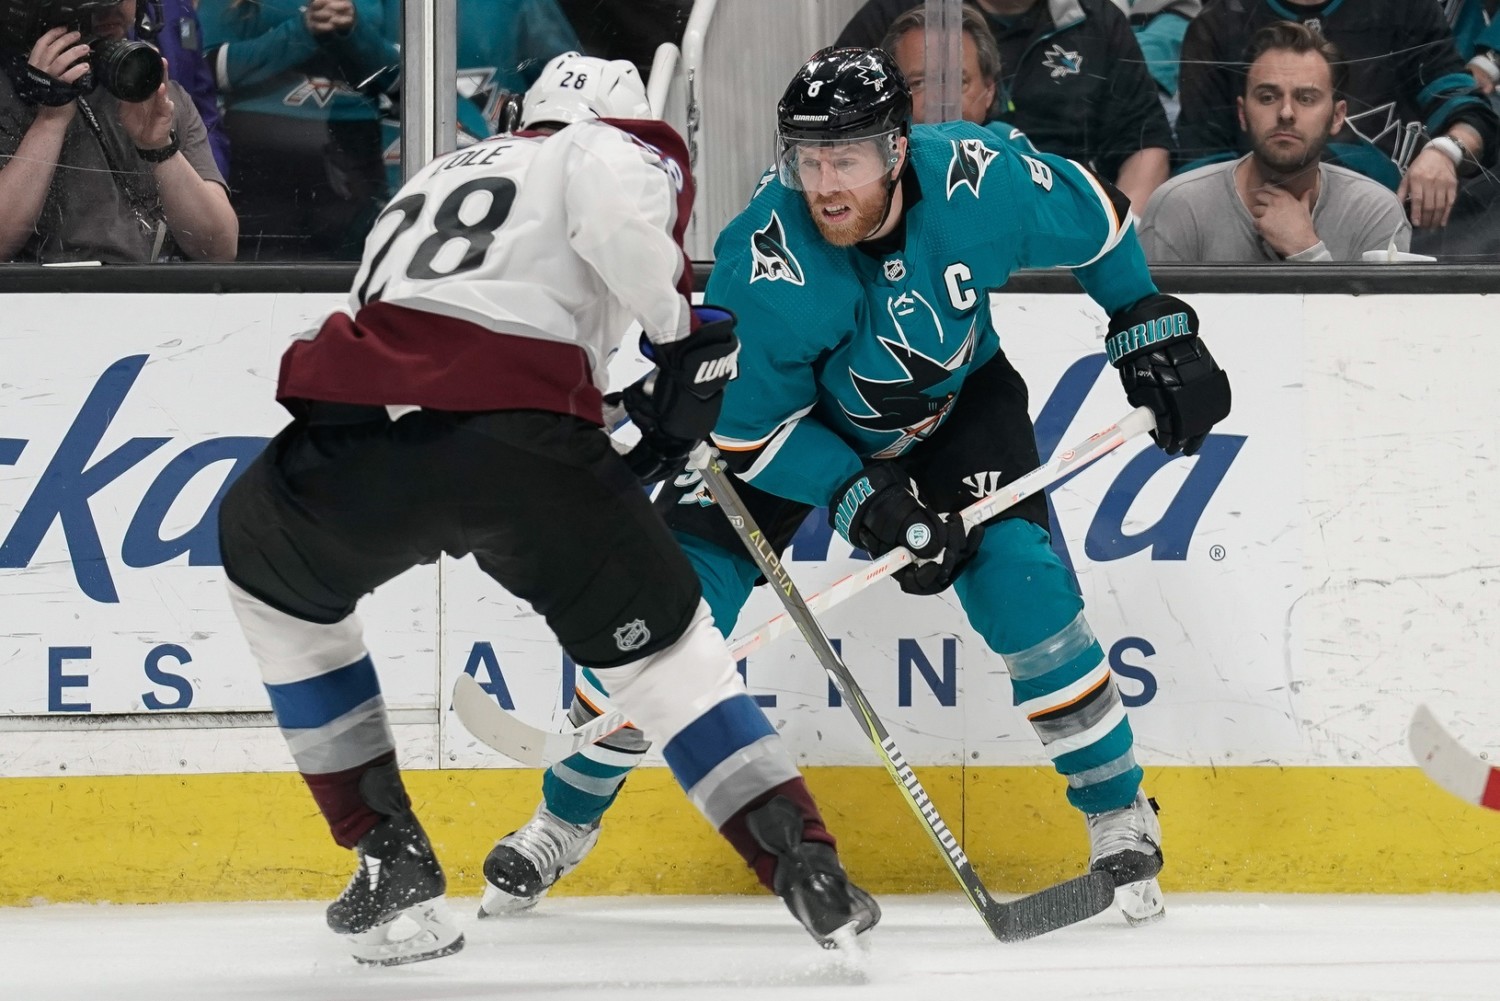 Several teams are interested in Joe Pavelski